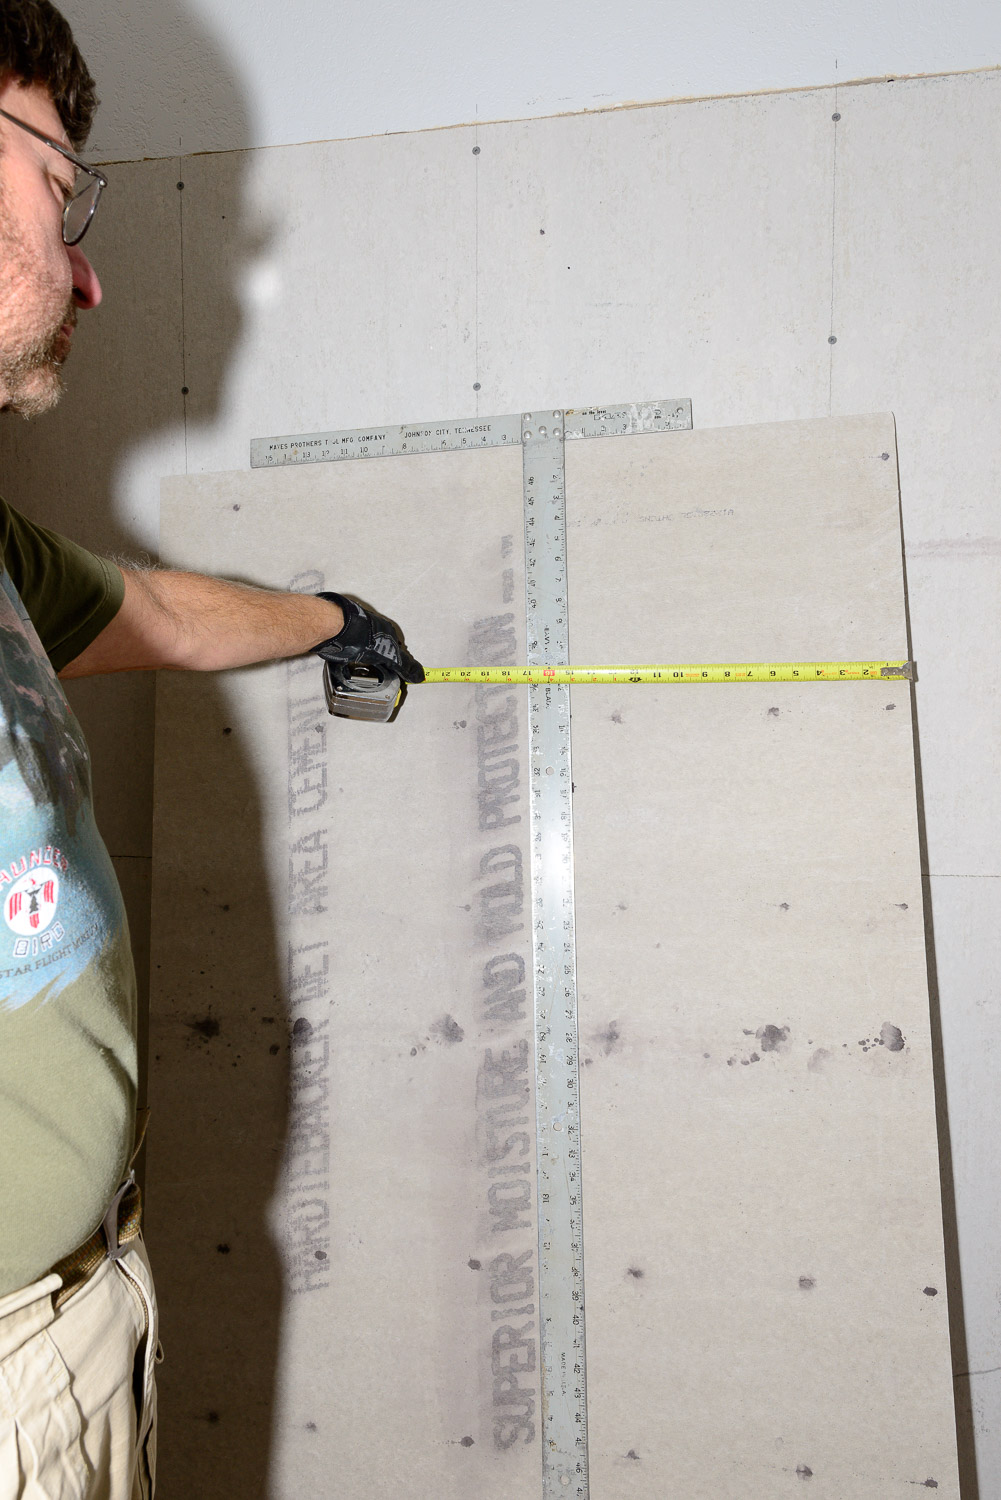 Measure 15" over from the right side of the board and draw a vertical line using a drywall T square